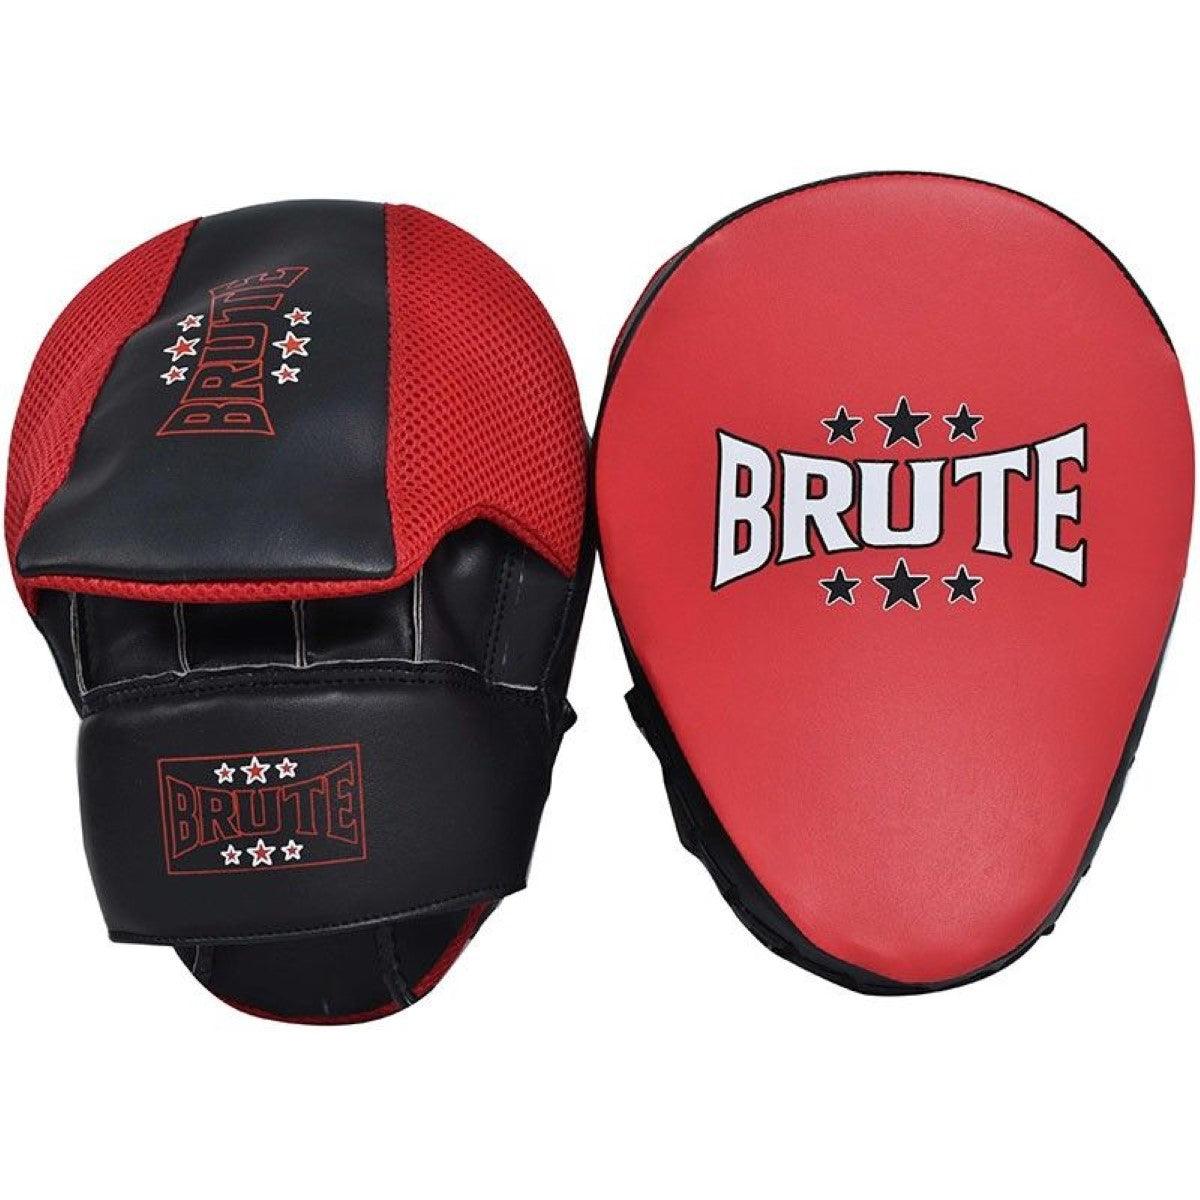 Brute Curved Mitts